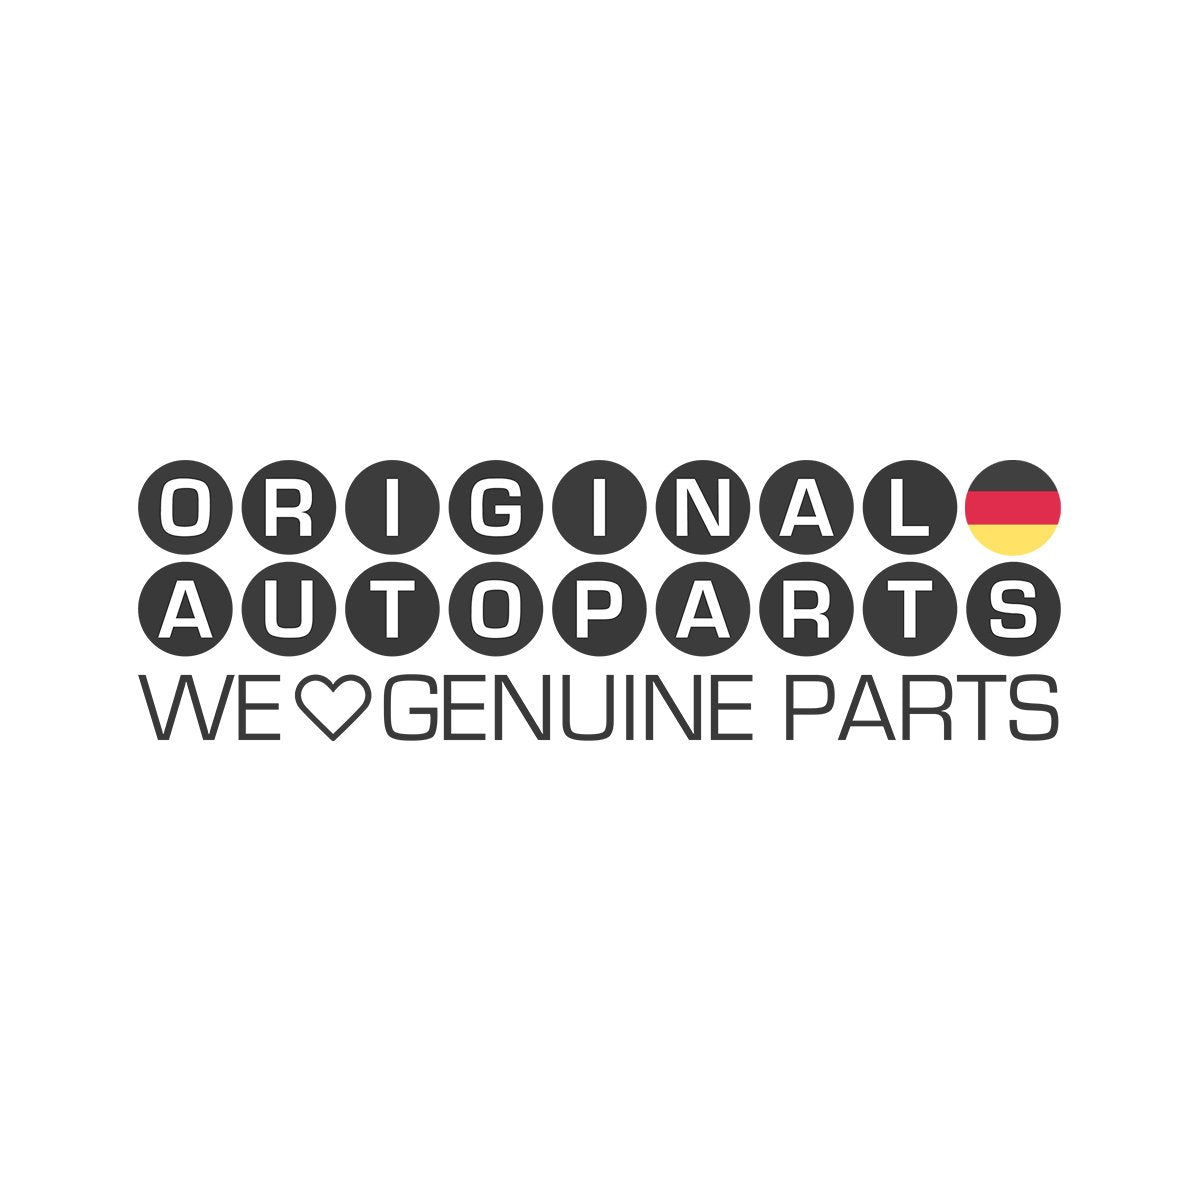 Genuine BMW BRAKE DISC ROTOR 34111151632 NO LONGER AVAILABLE, NEW CODE 34111163134